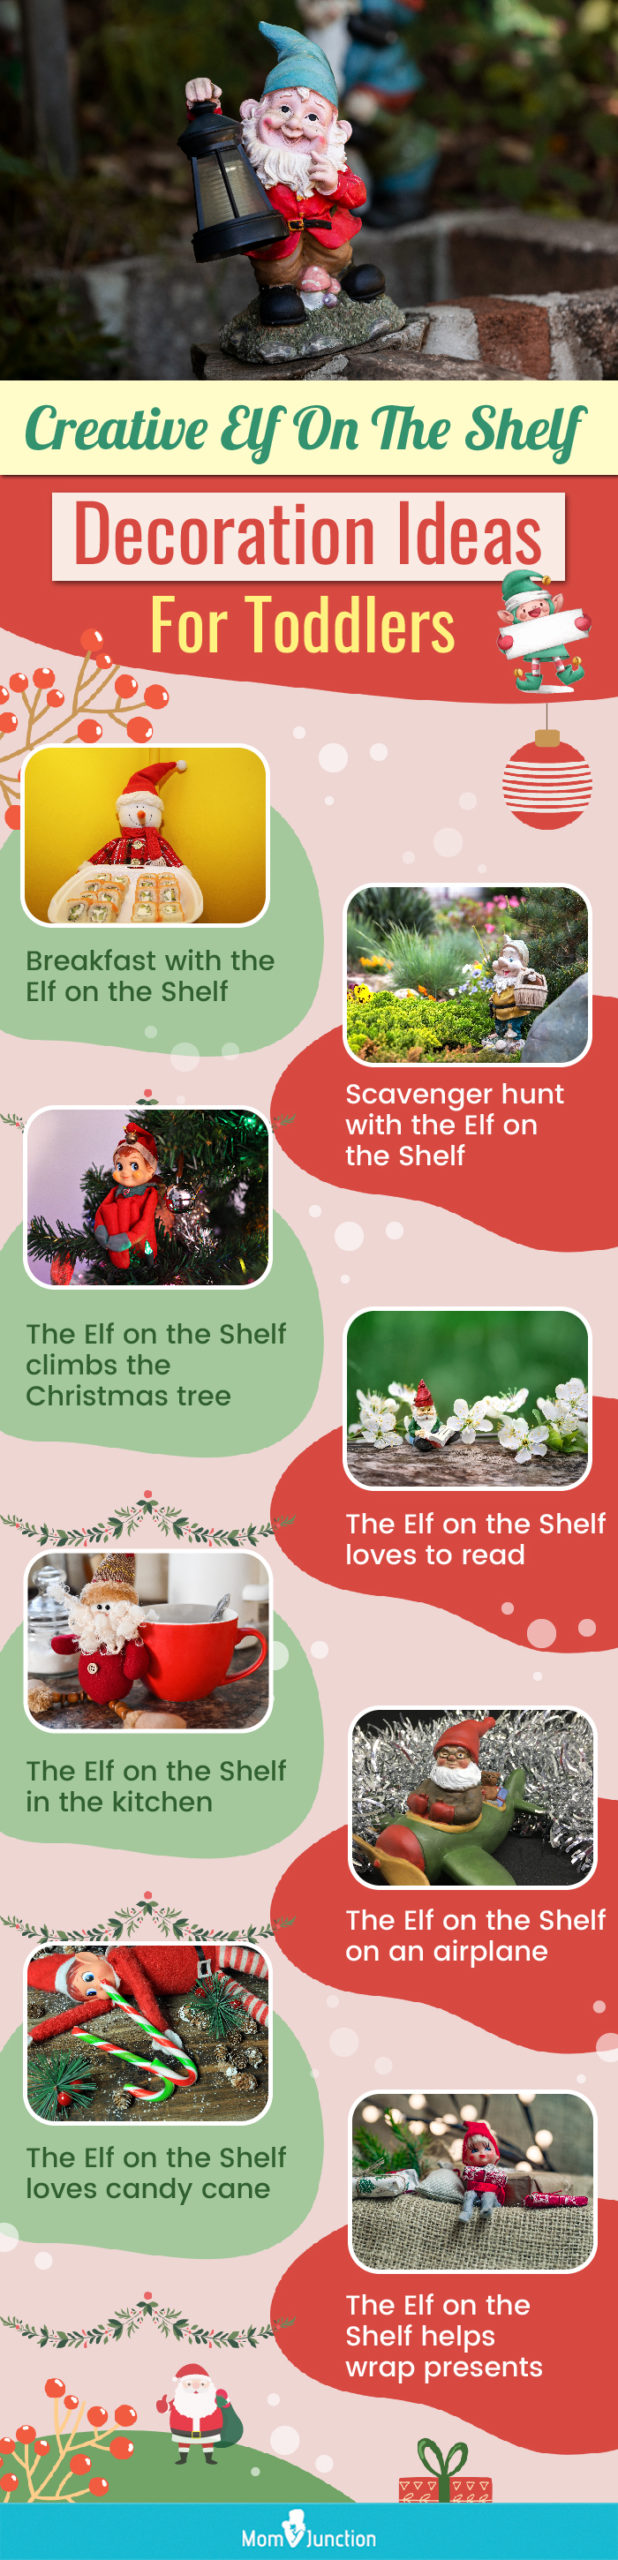 https://cdn2.momjunction.com/wp-content/uploads/2023/06/Creative-Elf-On-The-Shelf-Decoration-Ideas-For-Toddlers-scaled.jpg